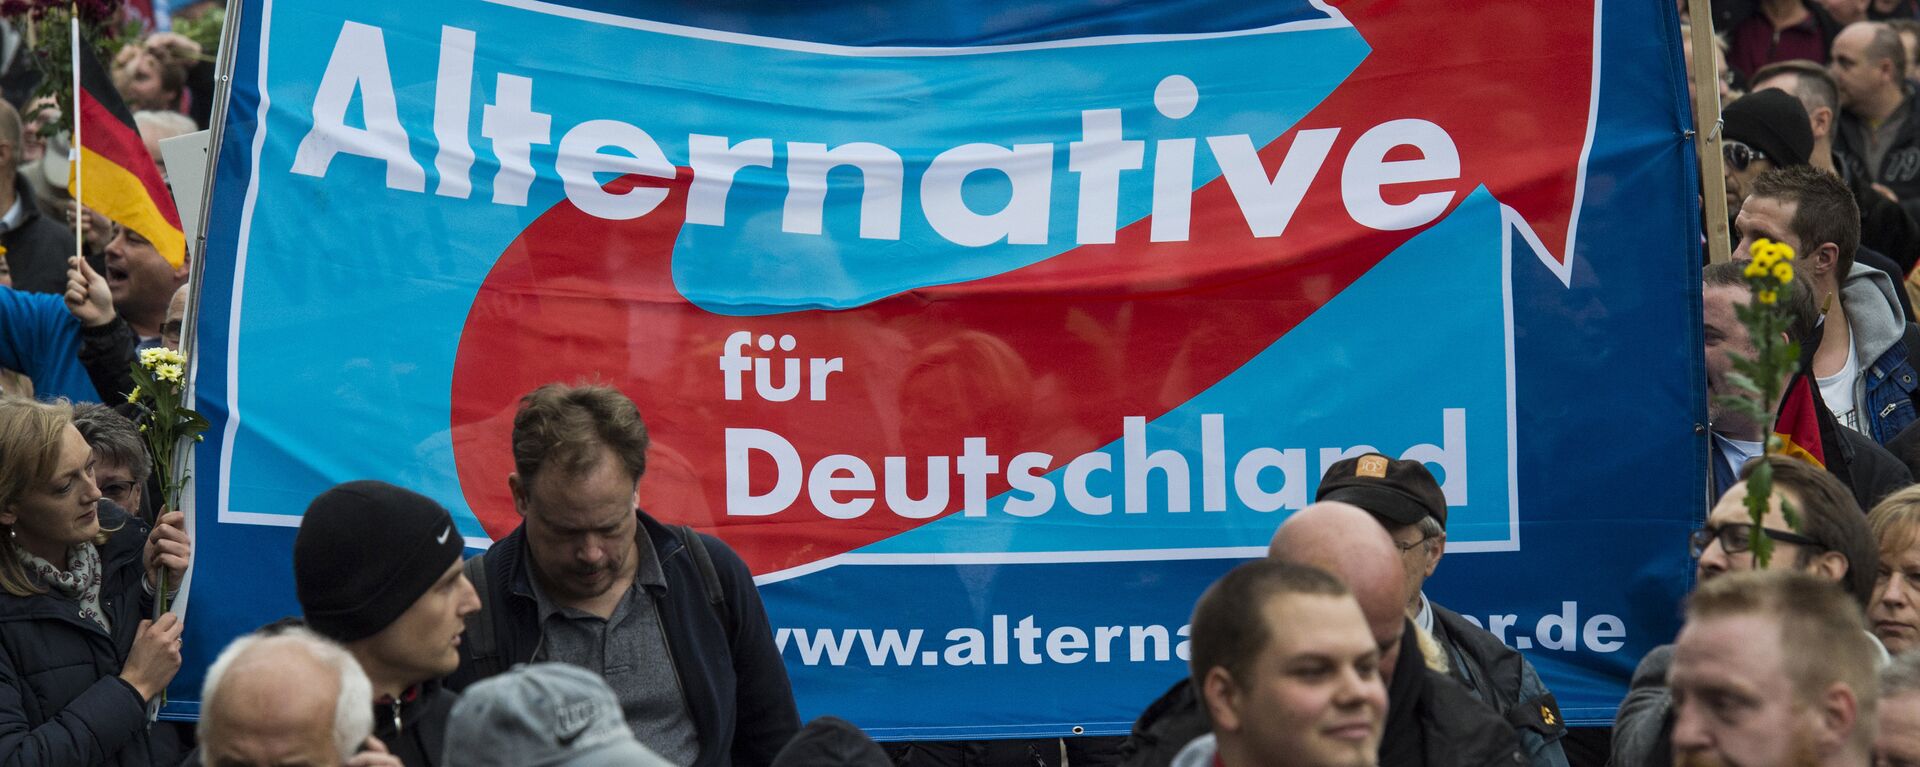 Supporters of the right-wing populist Alternative for Germany (AfD) party display an AfD banner during a demonstration by AfD supporters in Berlin (File) - Sputnik International, 1920, 09.10.2023